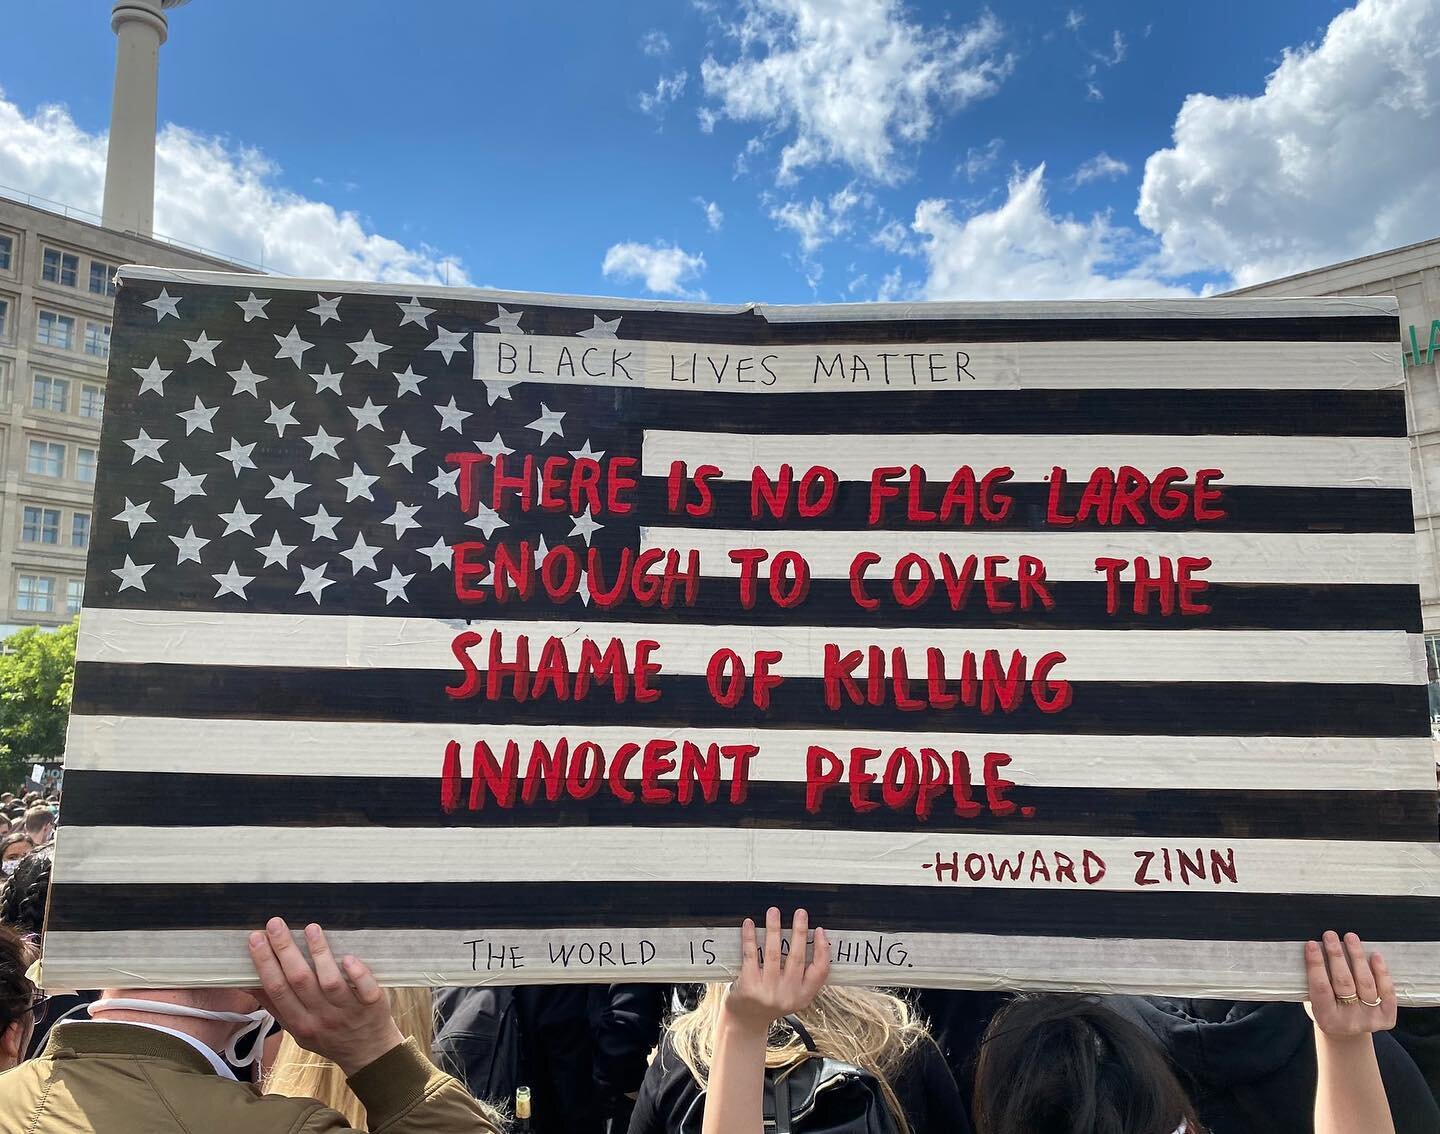 What a time to be an American - a time to reimagine what justice looks like in the USA. Hindsight is truly 20/20. It means that we have the privilege of learning our history without accepting it as our future as well. Keep listening, reading, asking,